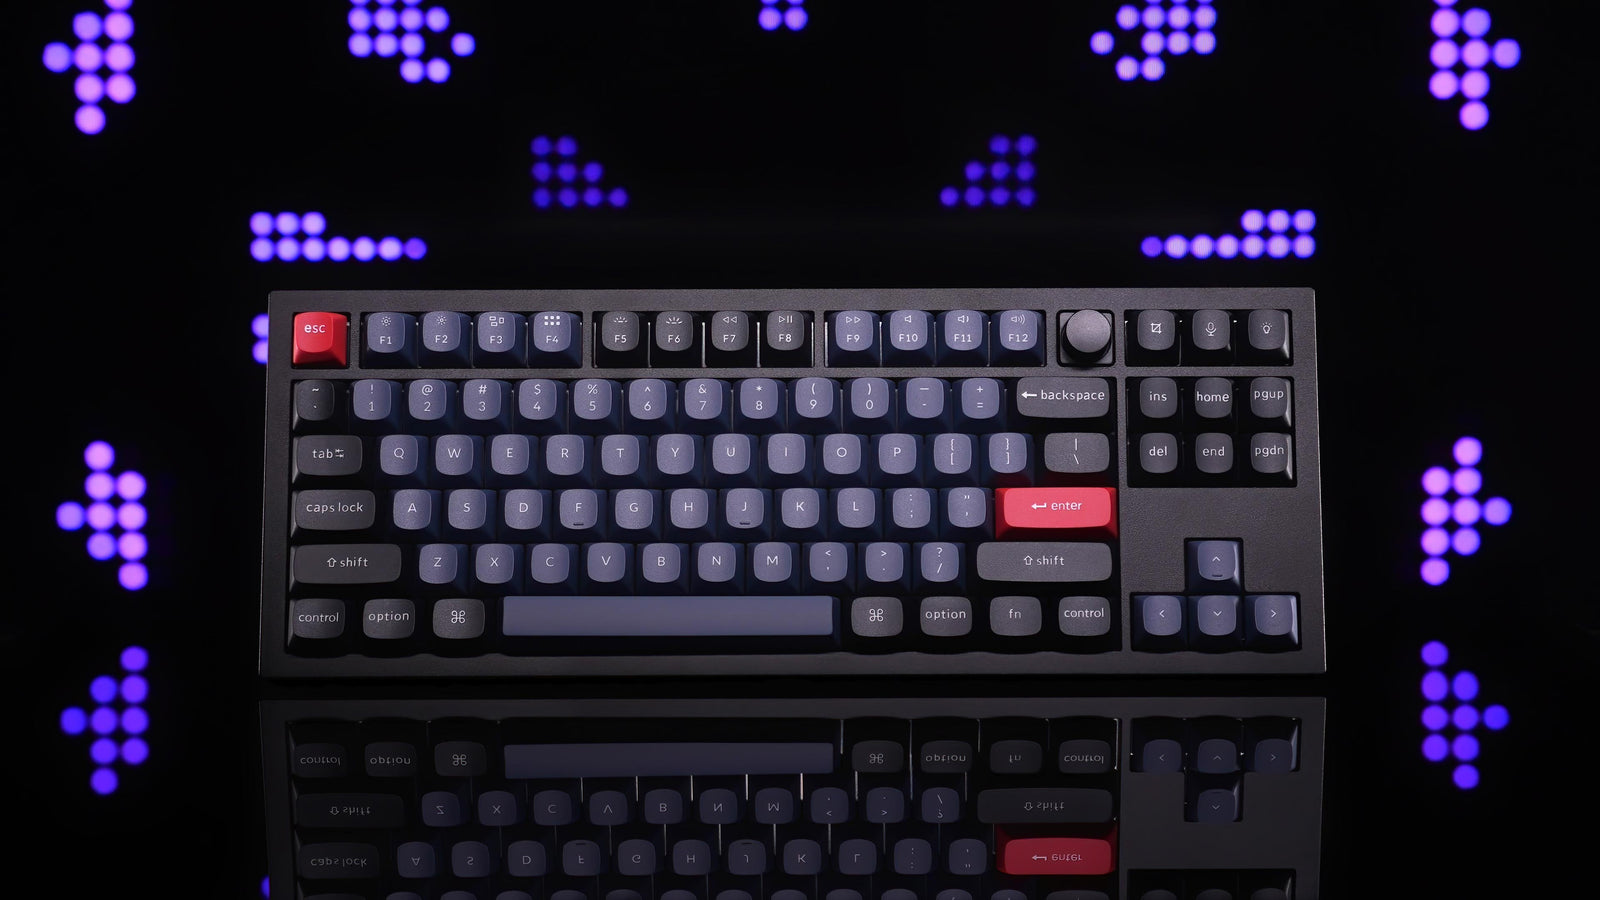 Keychron Keyboard Article Review - March 2022